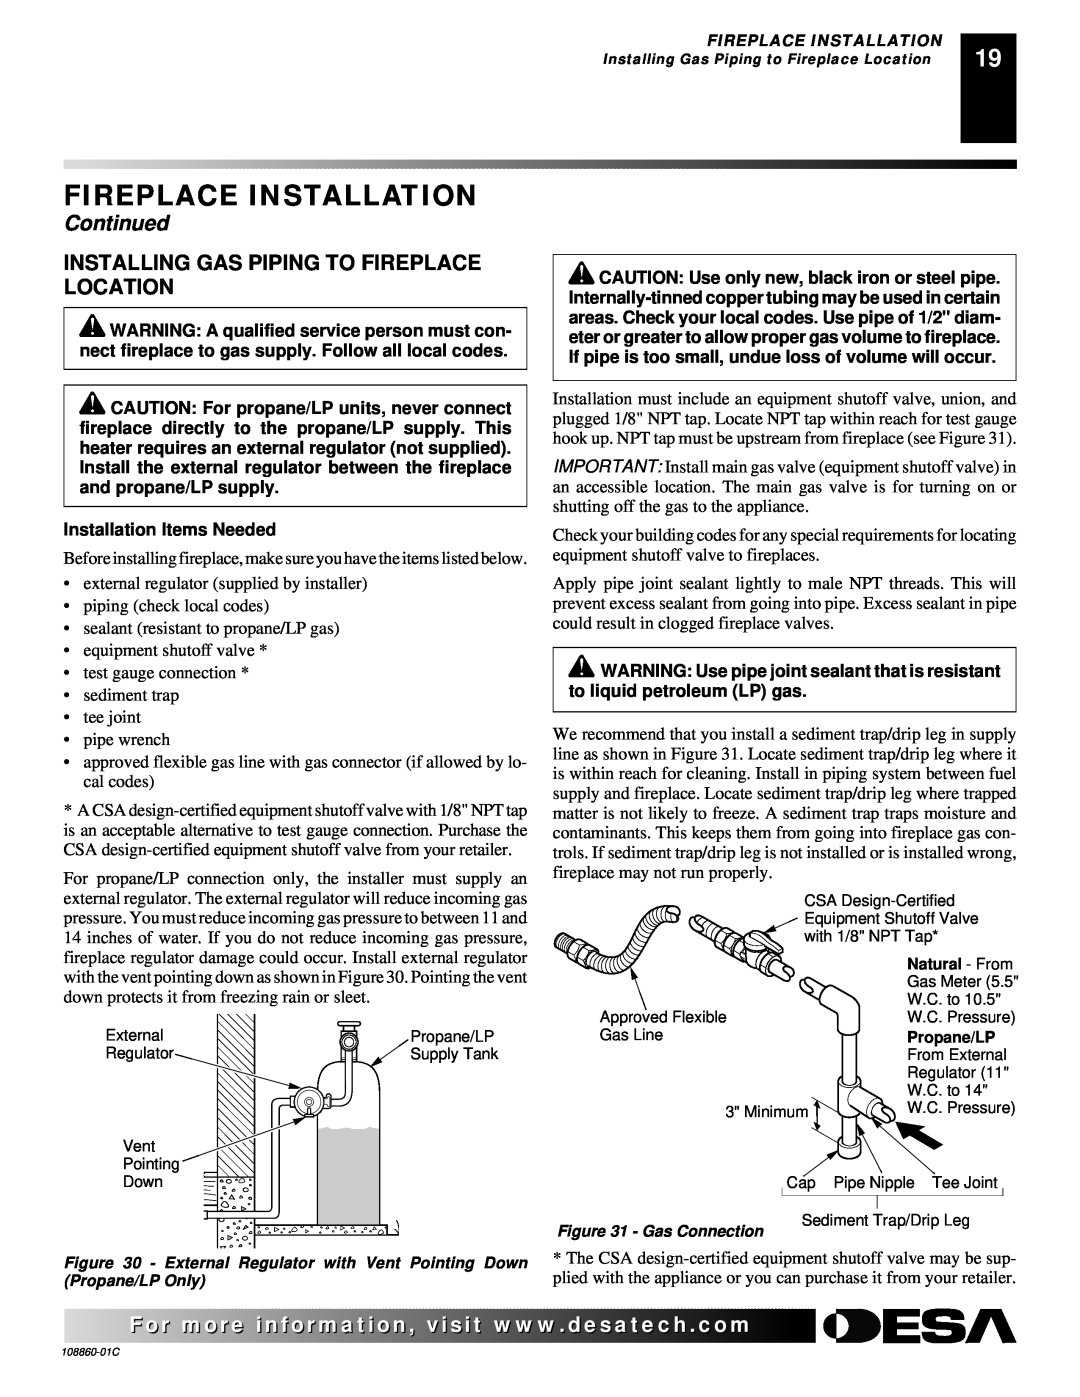 Desa (V)T36EN, (V)T36EP installation manual Fireplace Installation, Continued, Installing Gas Piping To Fireplace Location 